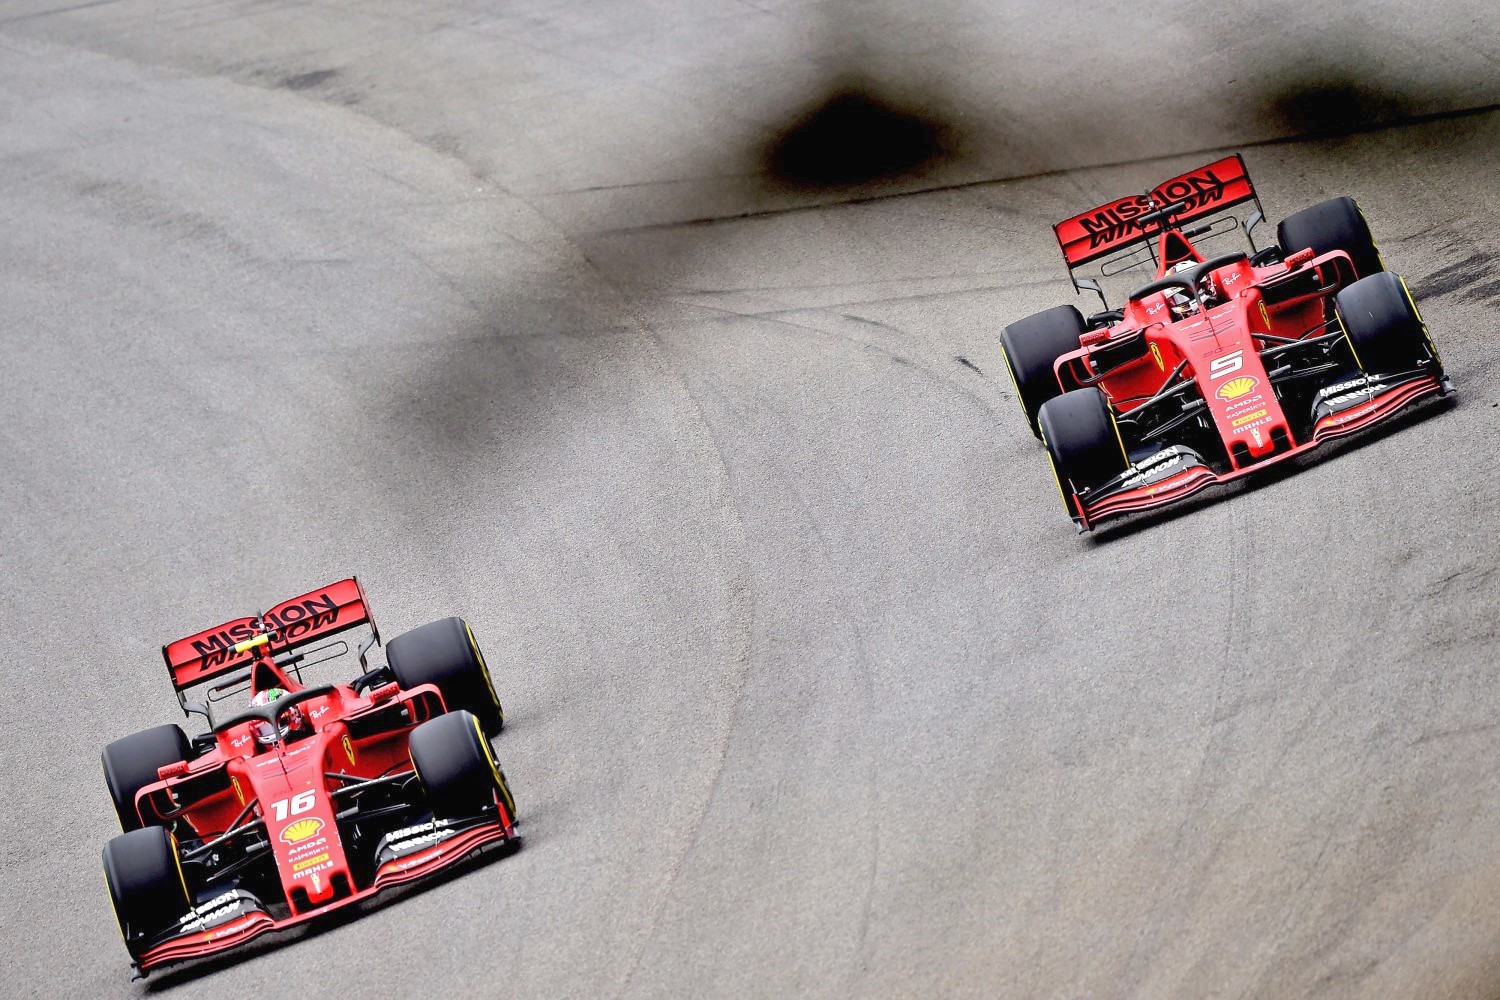 The Ferrari cars do not generate enough downforce to win the title